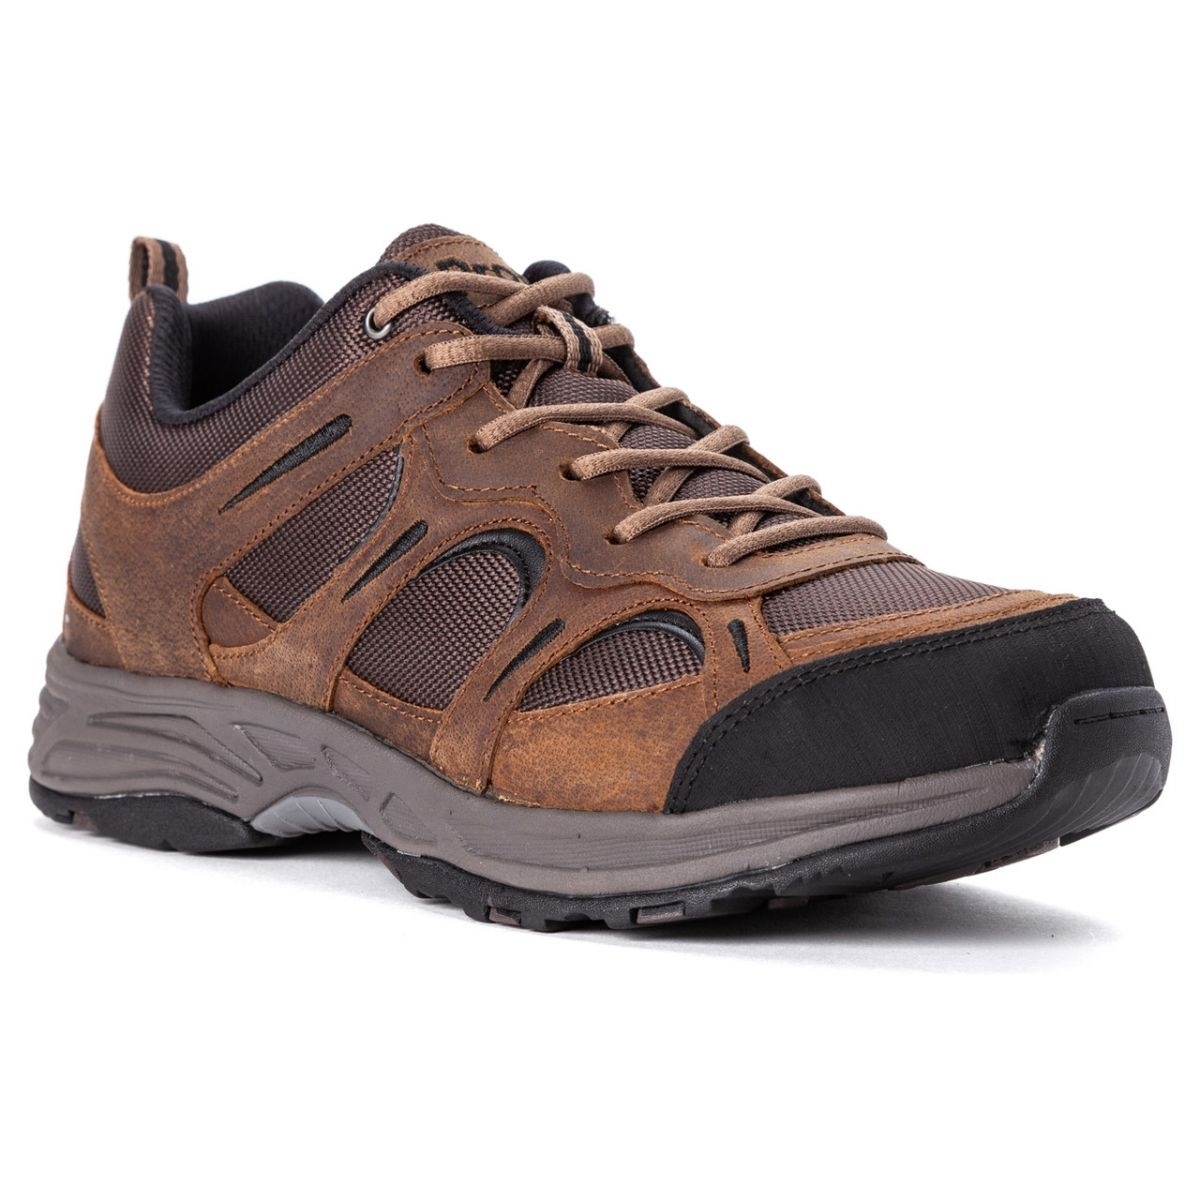 Propet Men's Connelly Hiking Shoe Brown - M5503BR BROWN - BROWN, 10.5-E